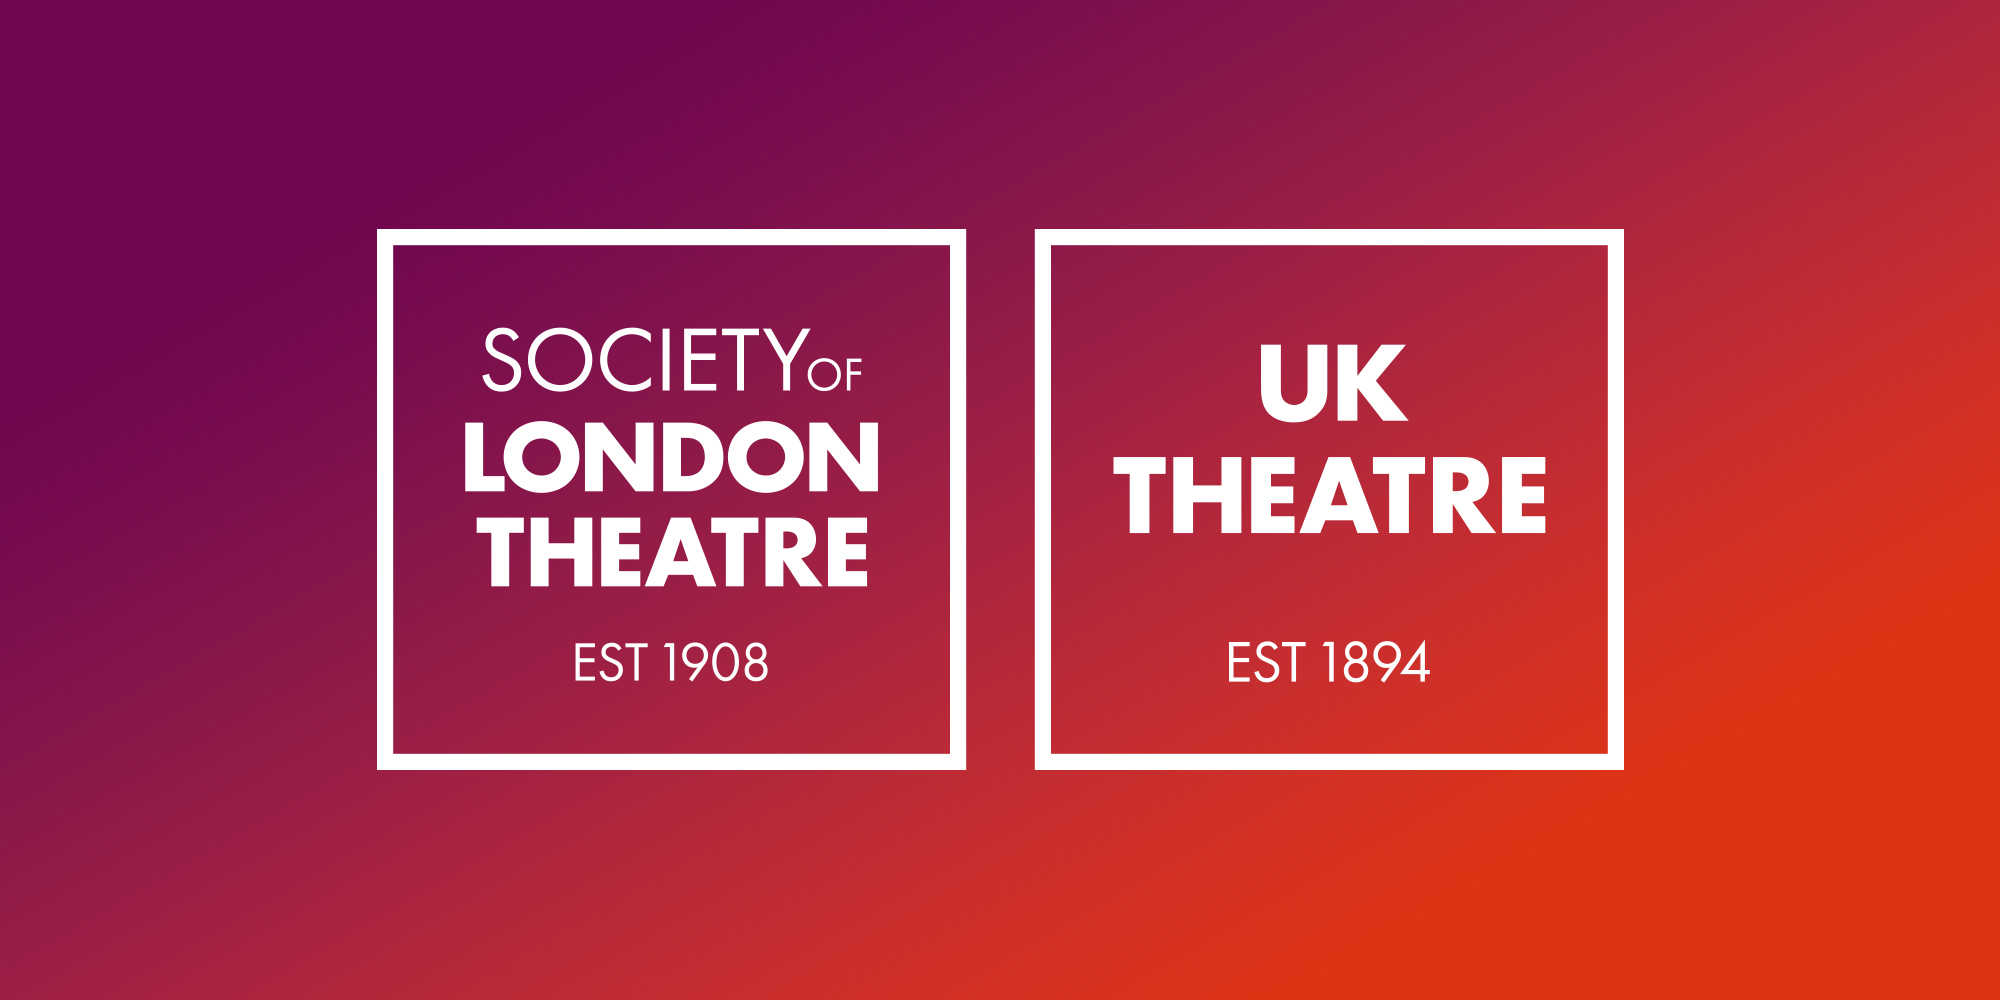 Review of technical qualifications can improve pathways into theatre industry 